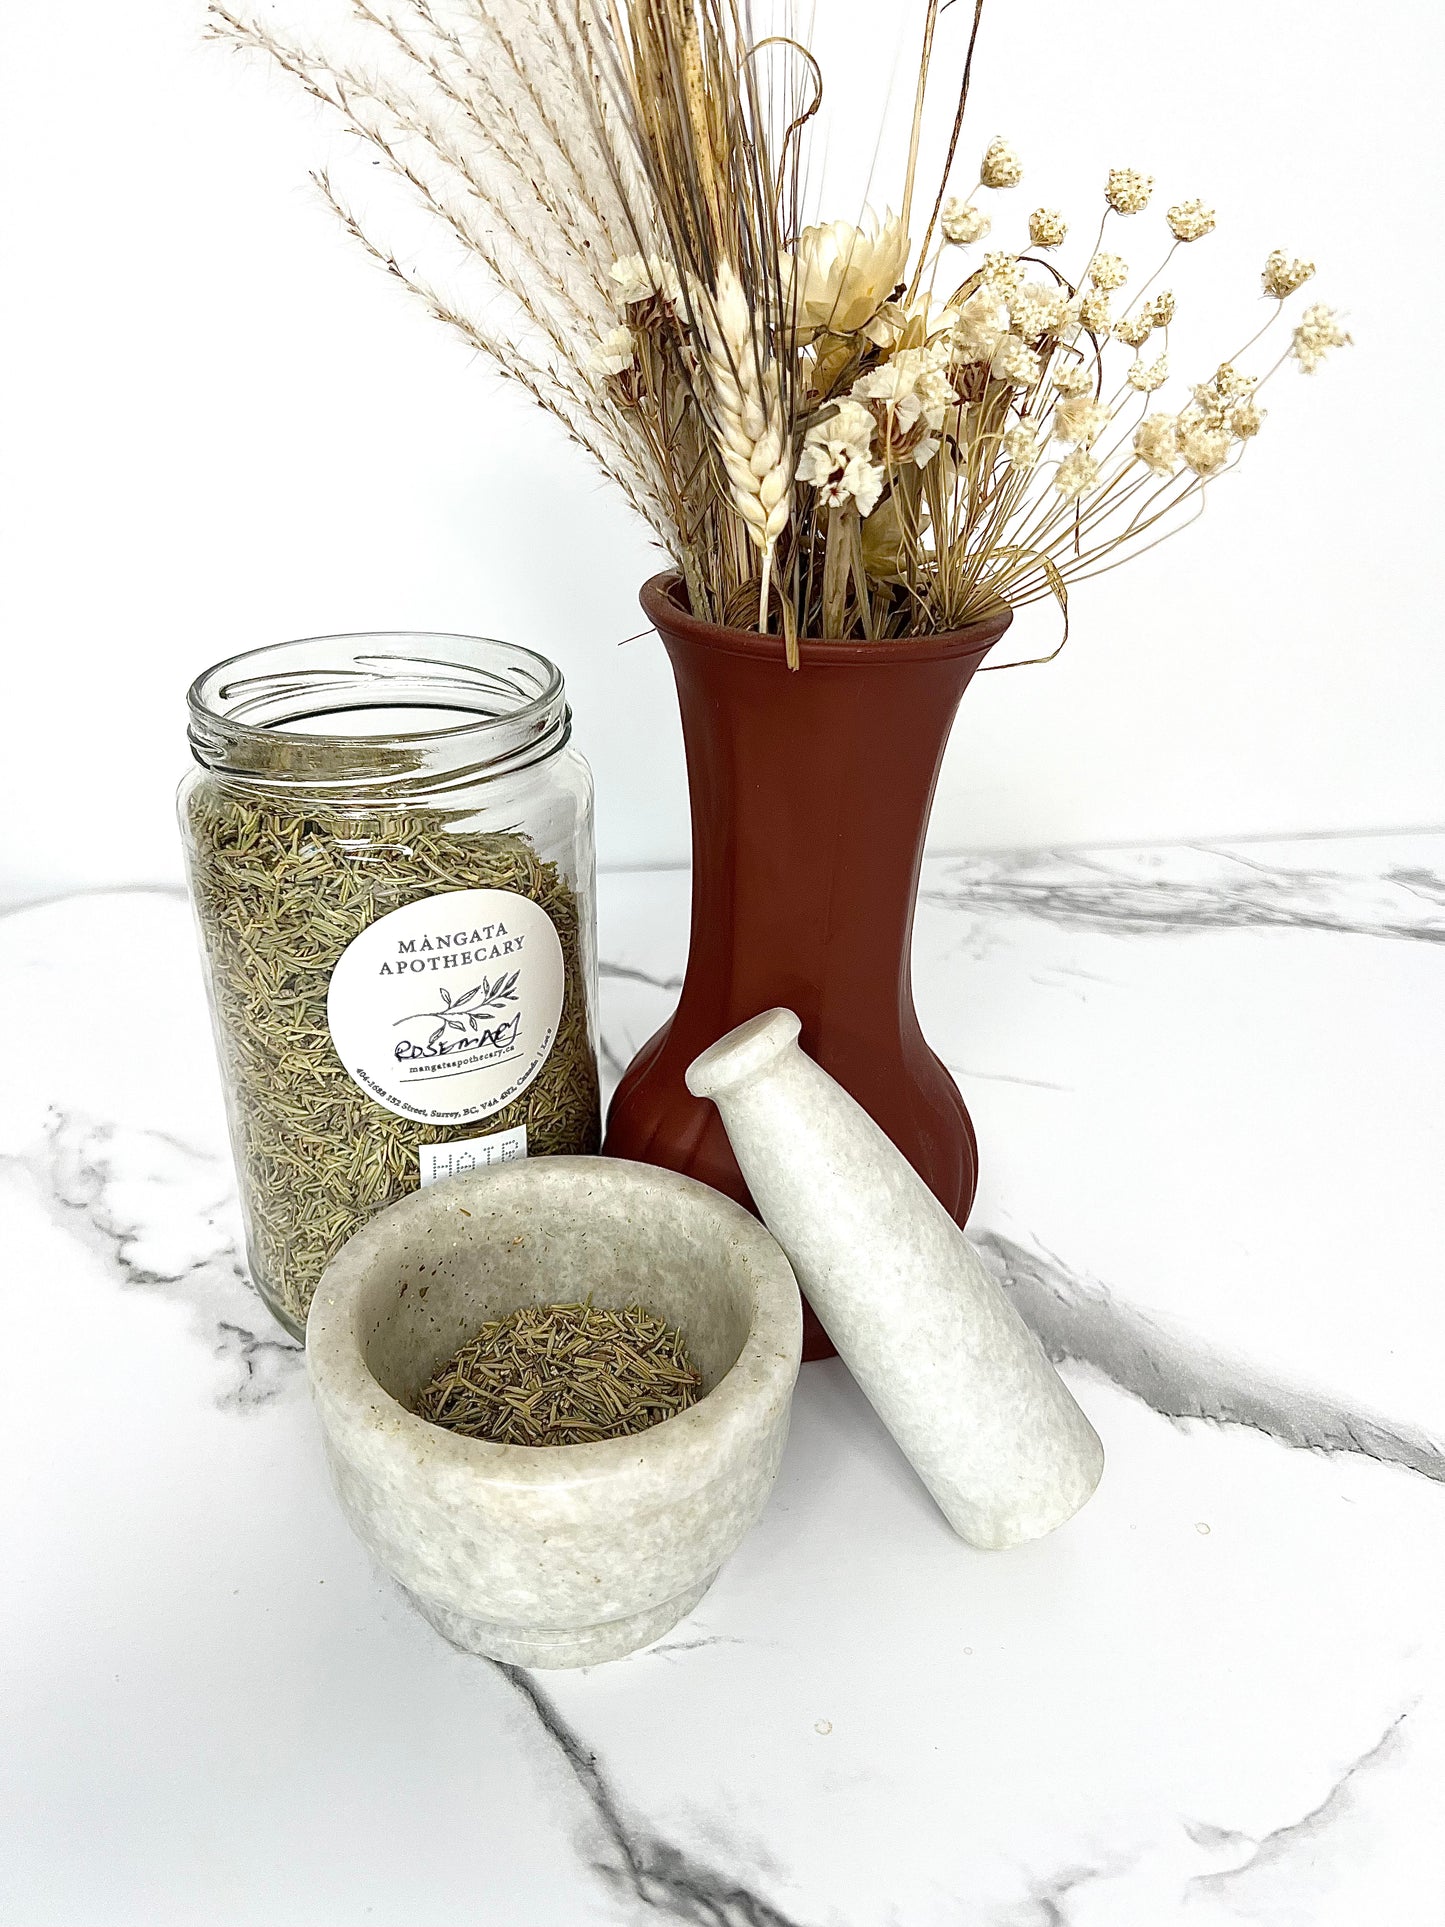 Rosemary Herb - Product Image For Mangata Dispensary